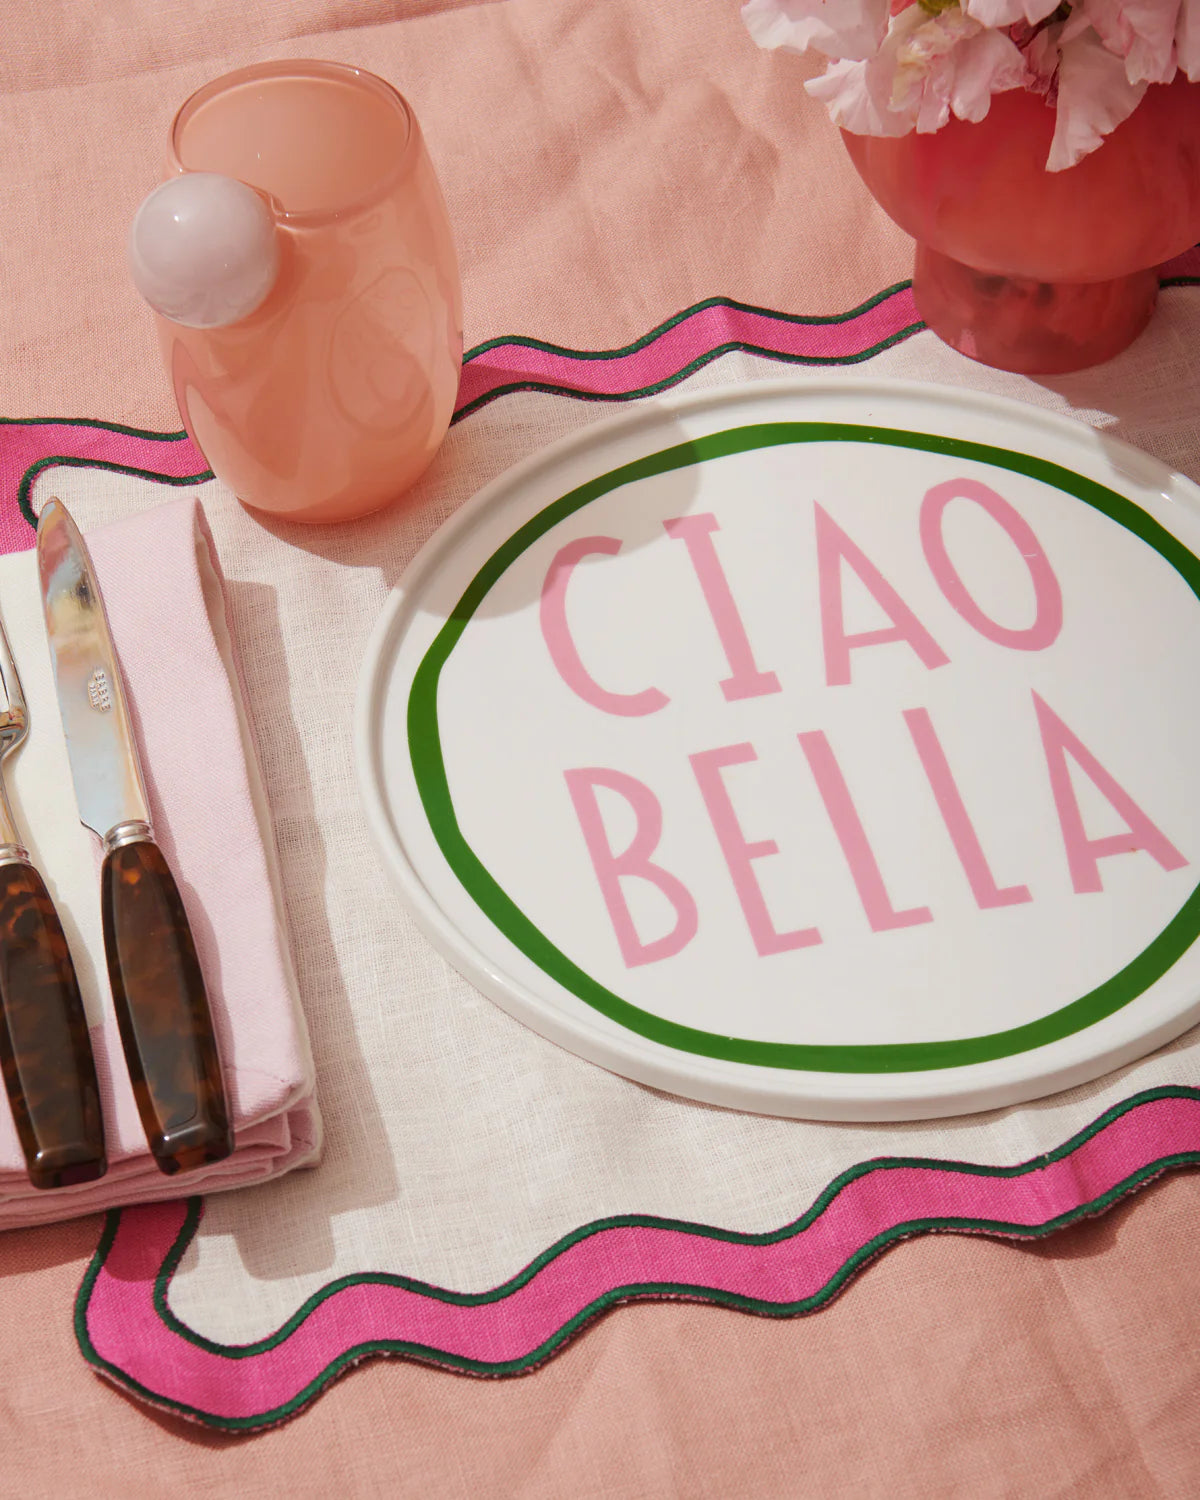 In The Roundhouse - Ciao Bella Plate